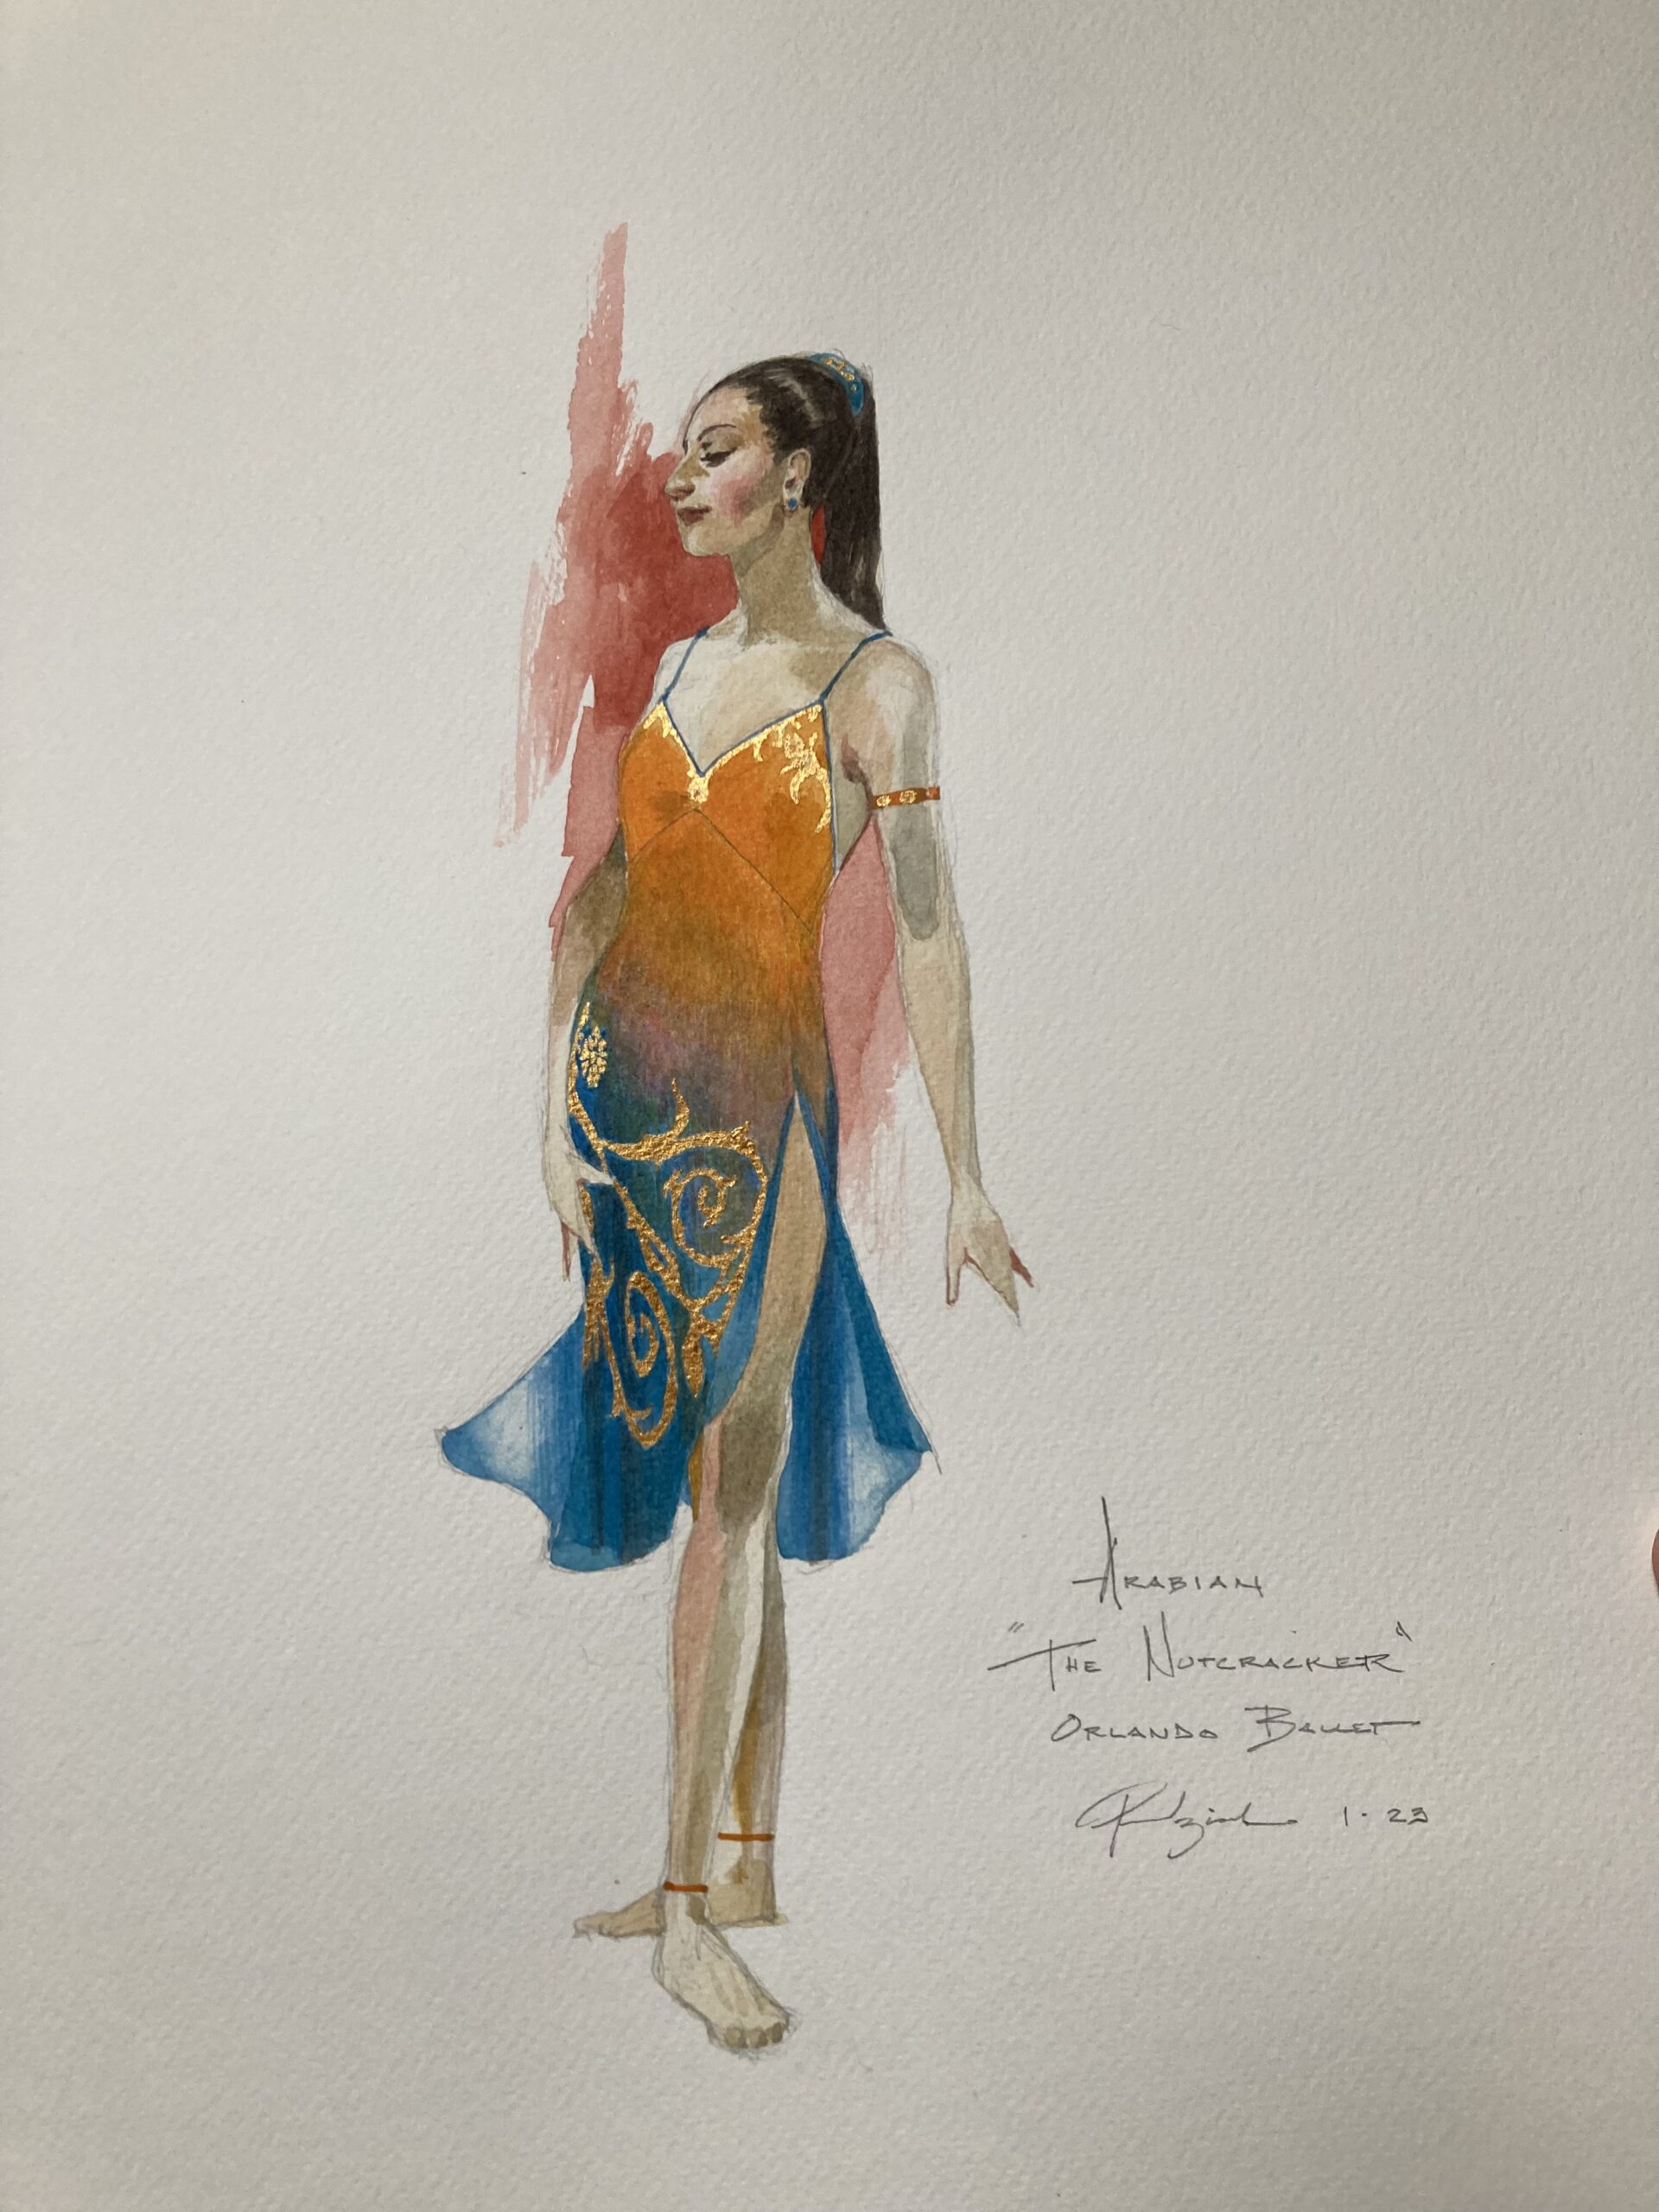 A sketch on paper in pen and watercolor shows for the design for a new Desert Princess costume.